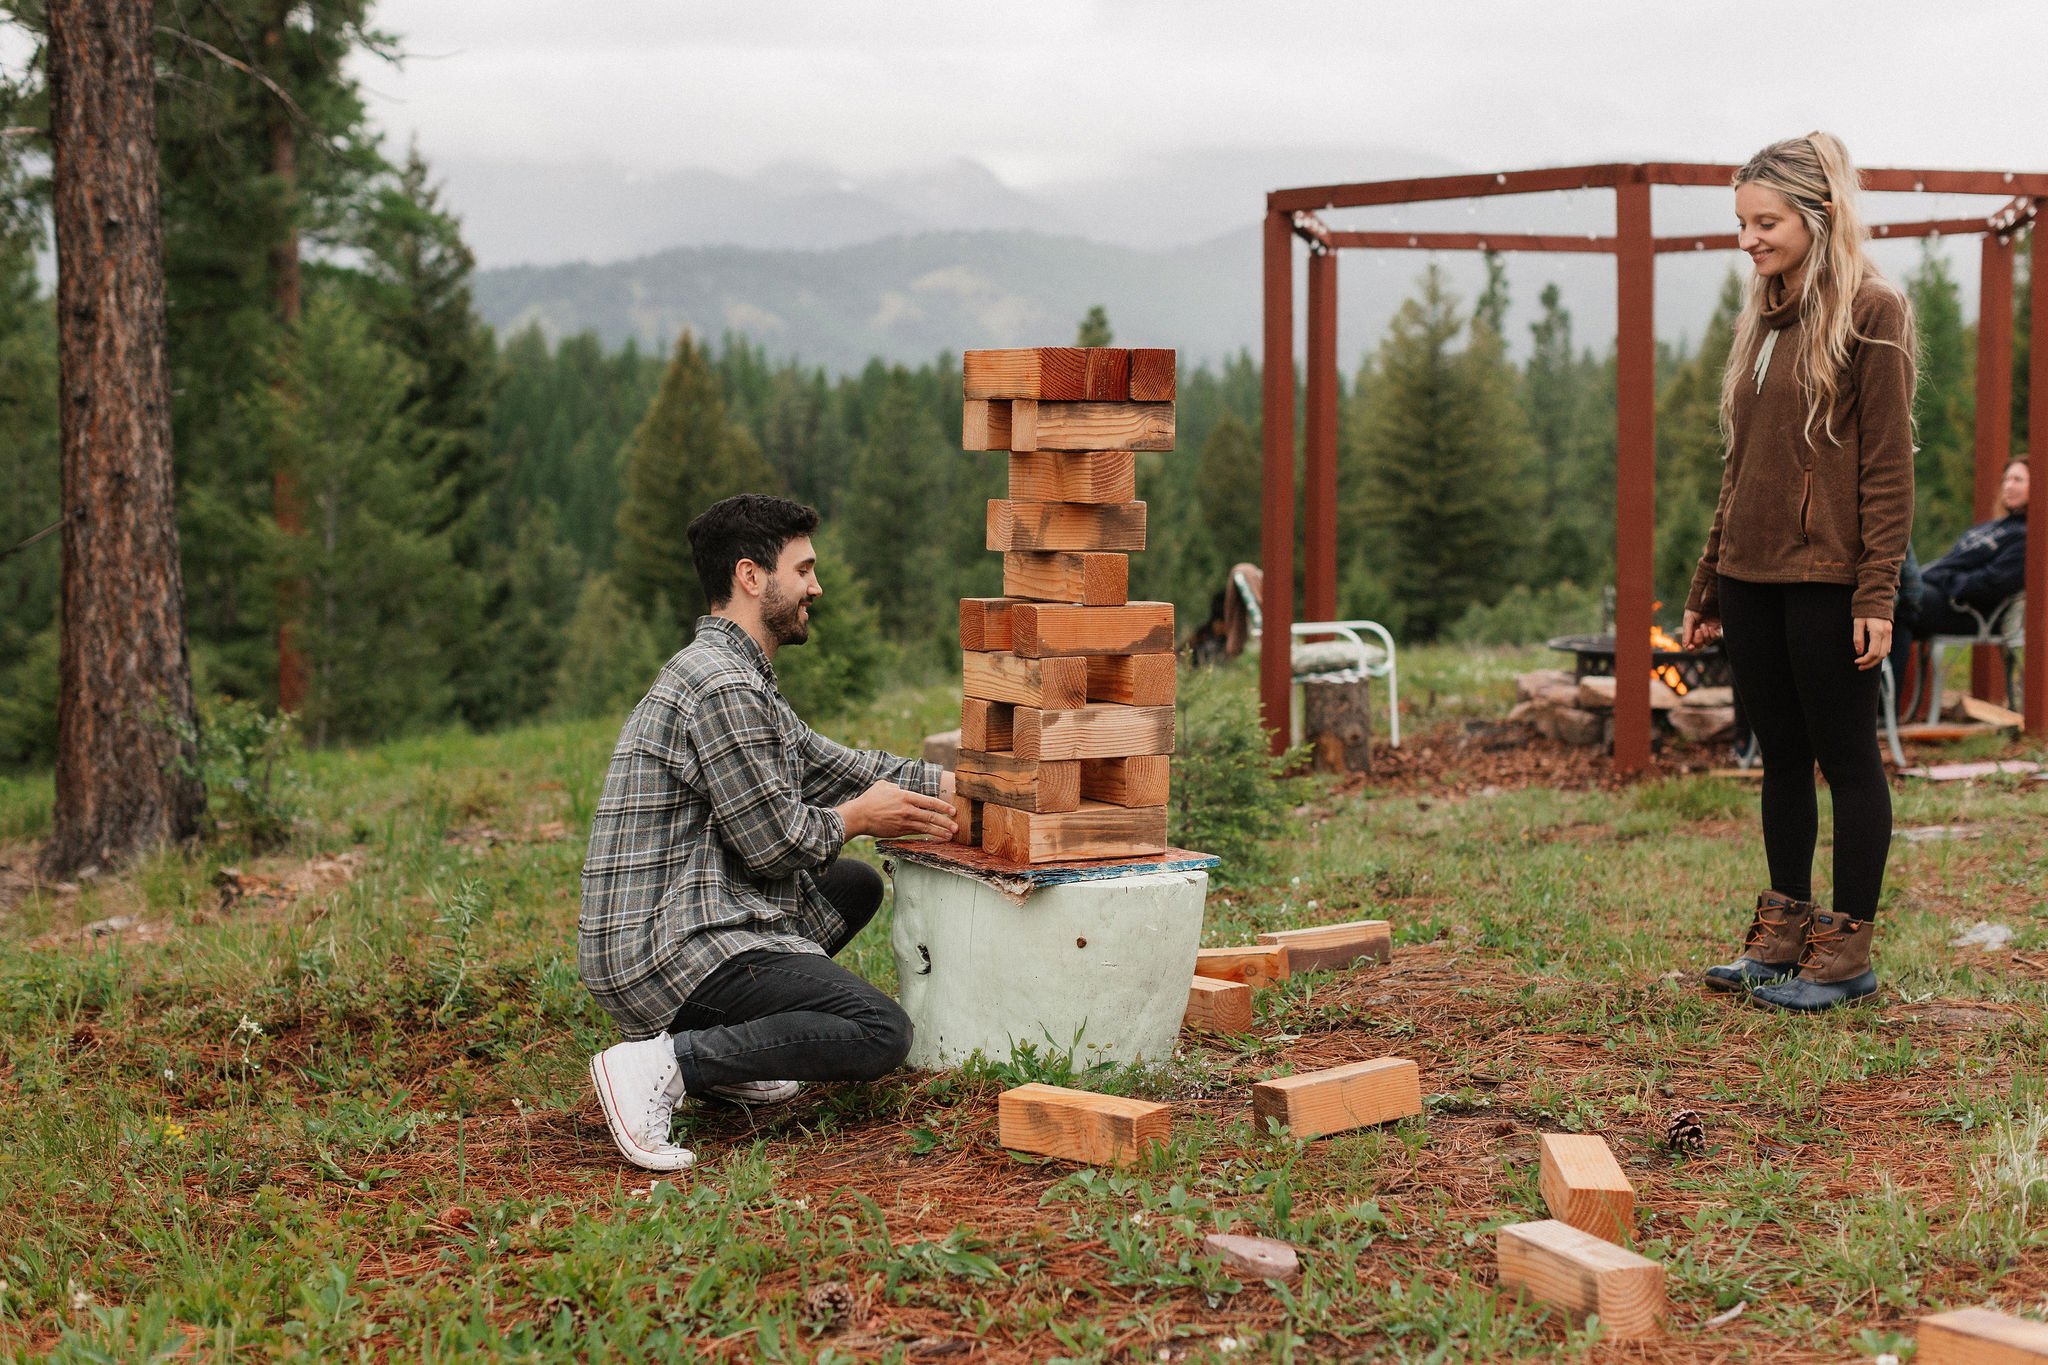 Play outdoor games, reconnect to nature and to each other at The Hohnstead Glamping Cabins Resort near Missoula, Montana